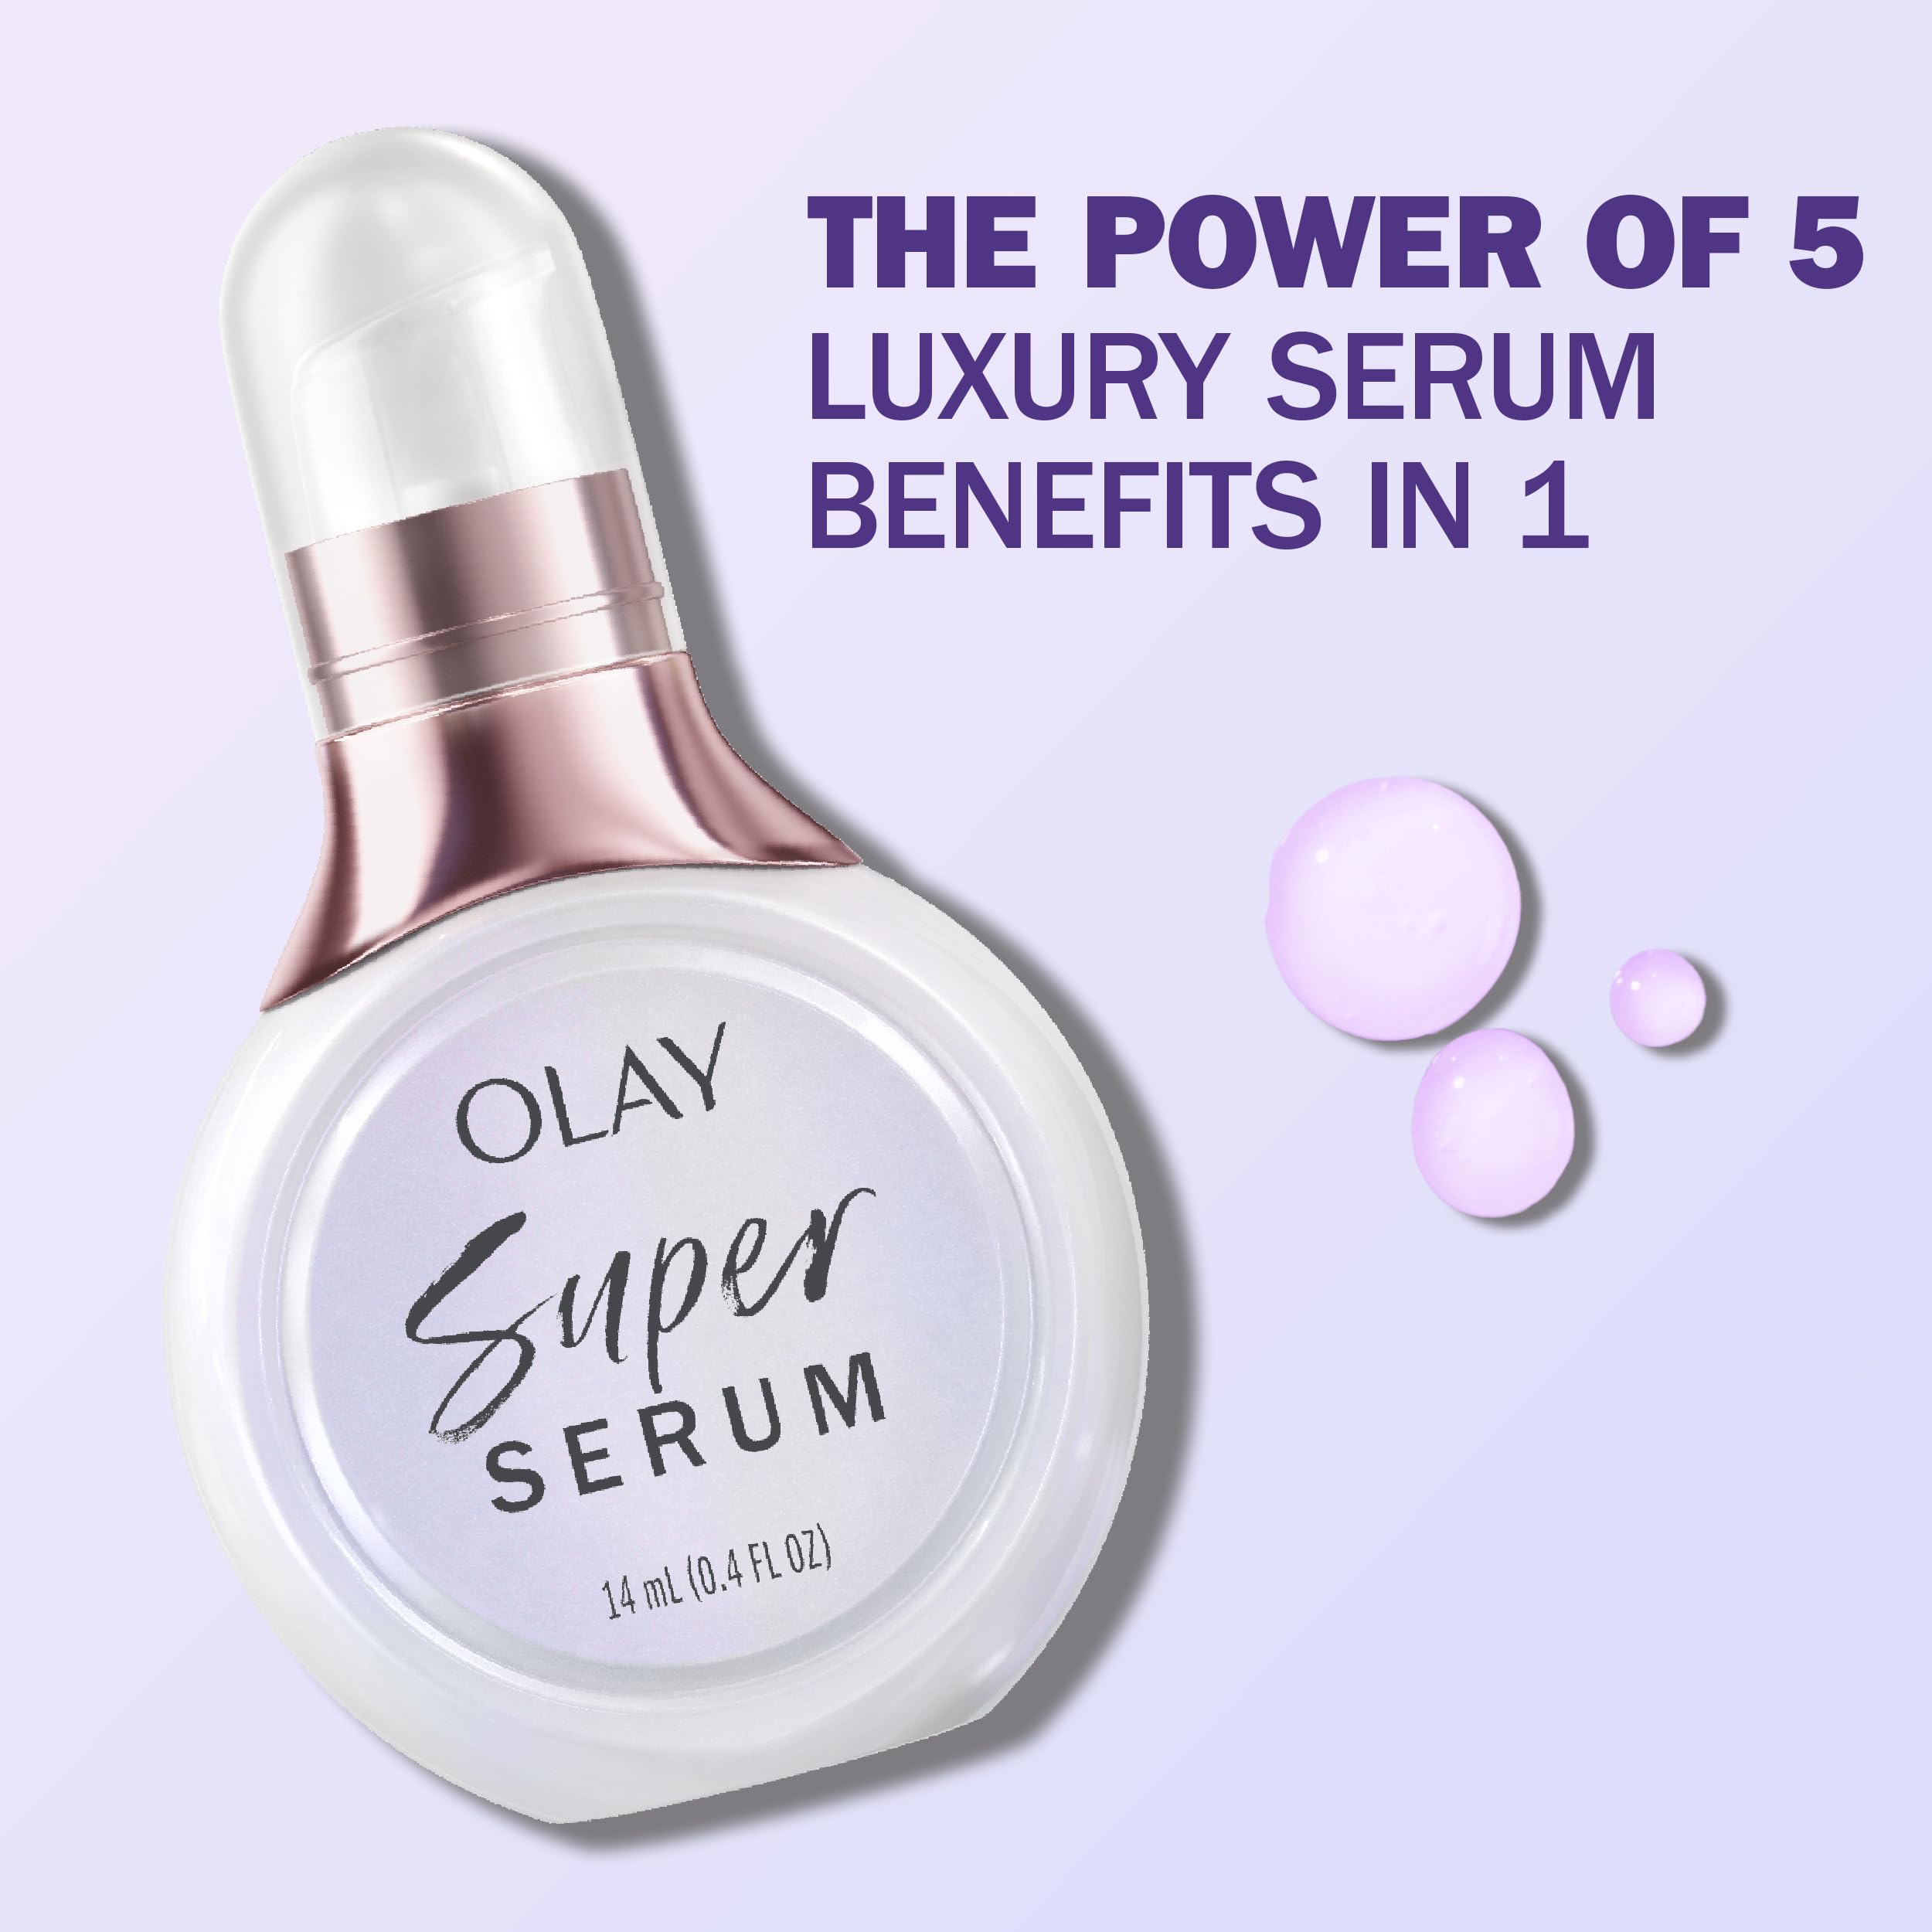 Olay Super Serum 5-in-1 Lightweight Resurfacing Face Serum, Trial Size 0.4 fl oz Smoothing Skin Care Treatment with Niacinamide, Vitamin C, Collagen Peptide, Vitamin E, and AHA